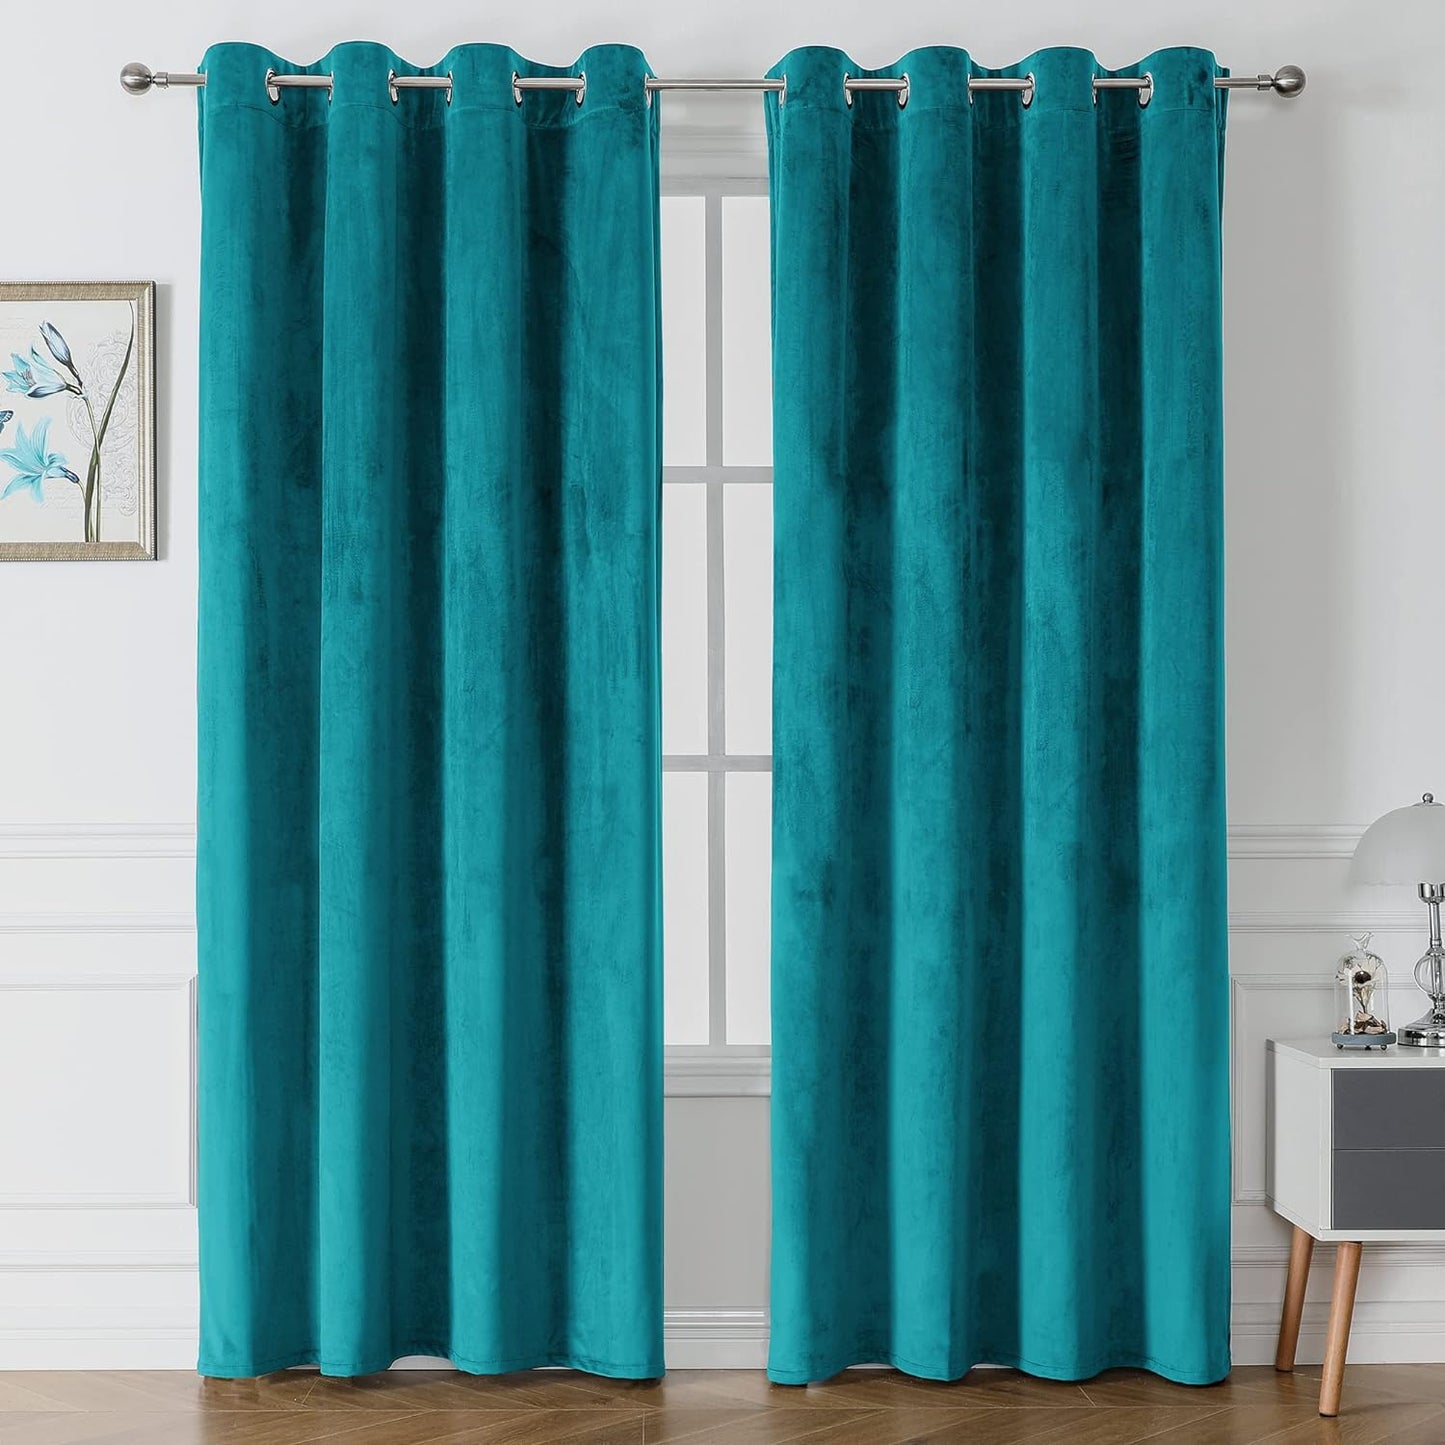 Victree Velvet Curtains for Bedroom, Blackout Curtains 52 X 84 Inch Length - Room Darkening Sun Light Blocking Grommet Window Drapes for Living Room, 2 Panels, Navy  Victree Teal Blue 52 X 96 Inches 